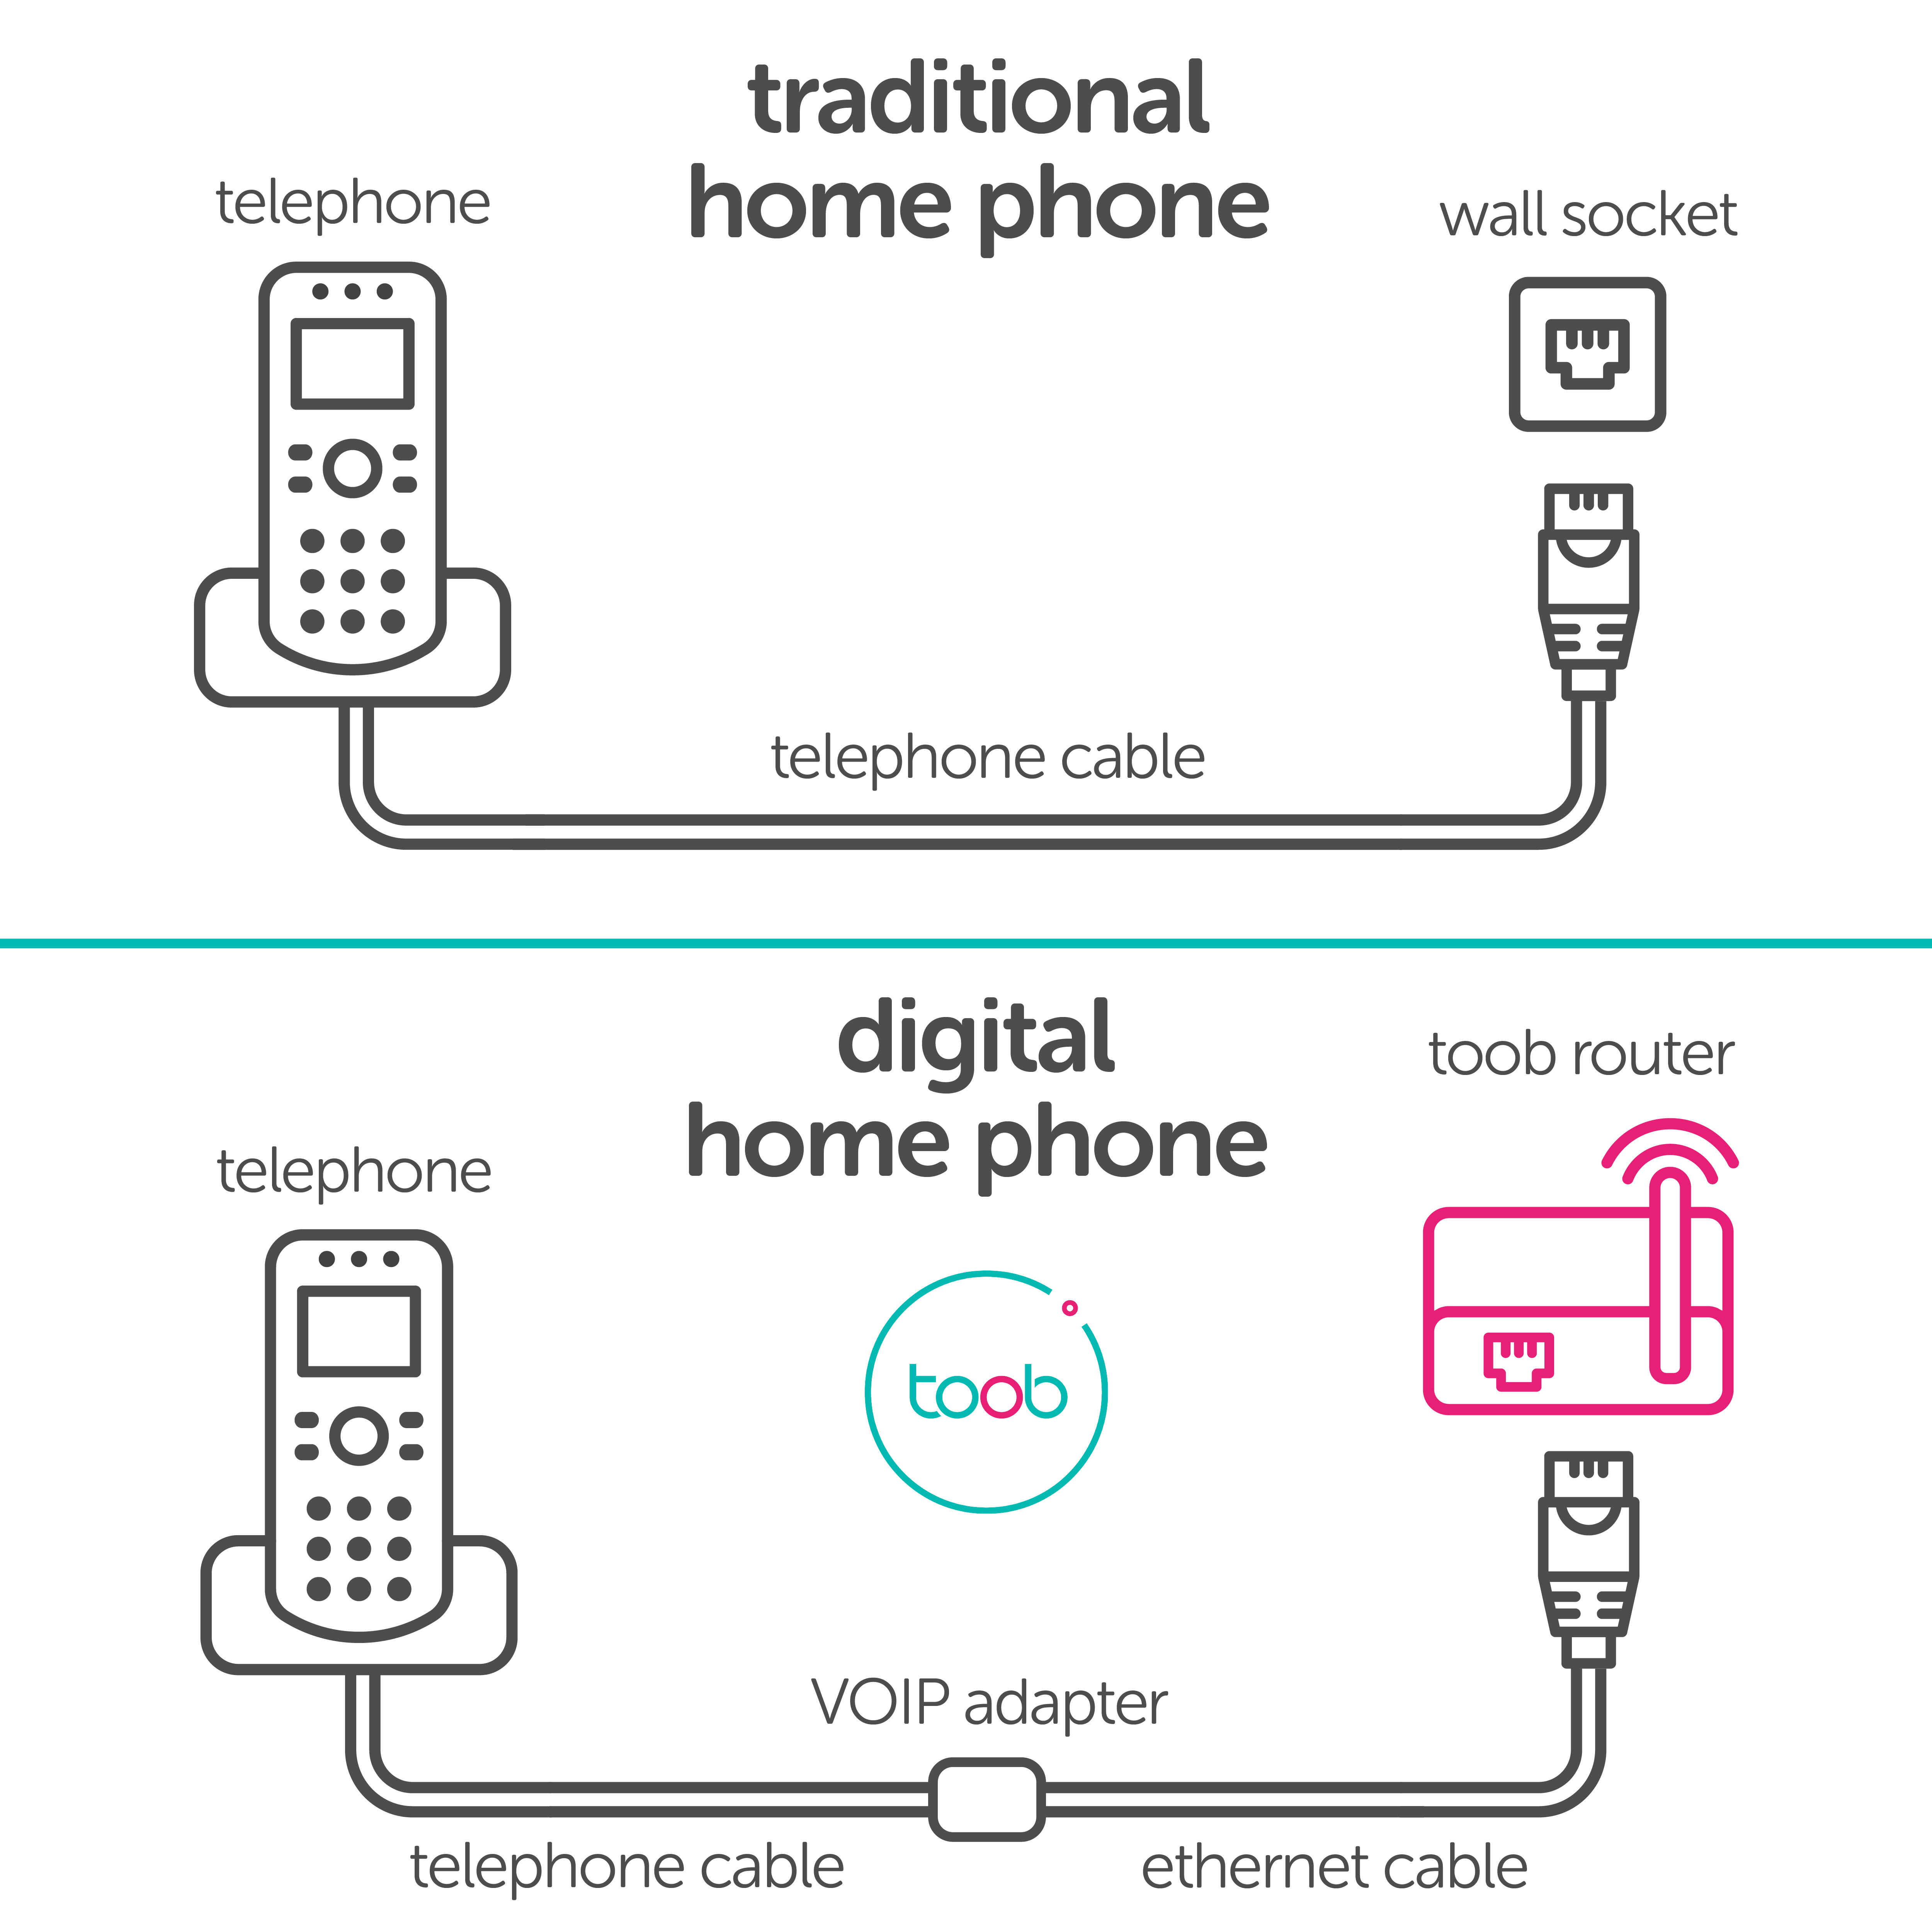 The difference between traditional landline and a digital home phone